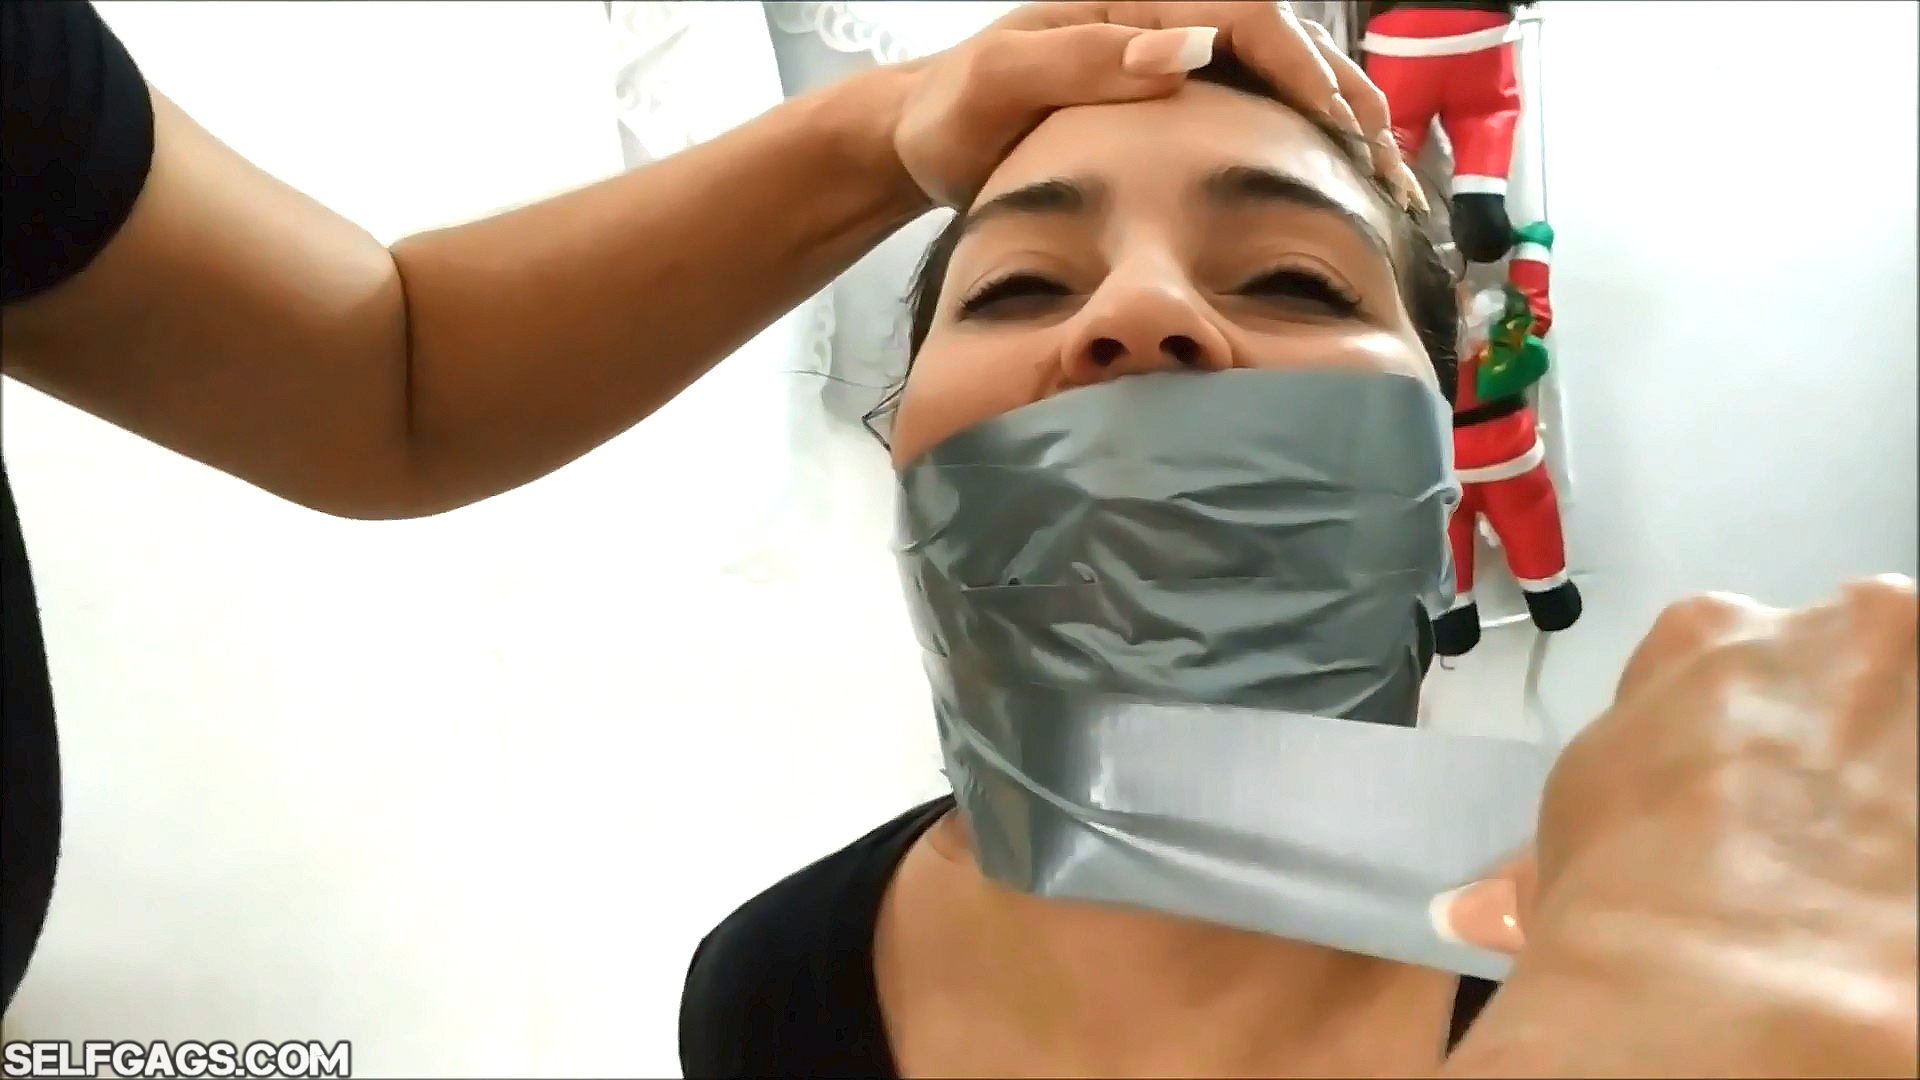 Latina-Girl-Duct-Tape-Wrap-Gagged-Big-And-Tight-By-Milf-1. 